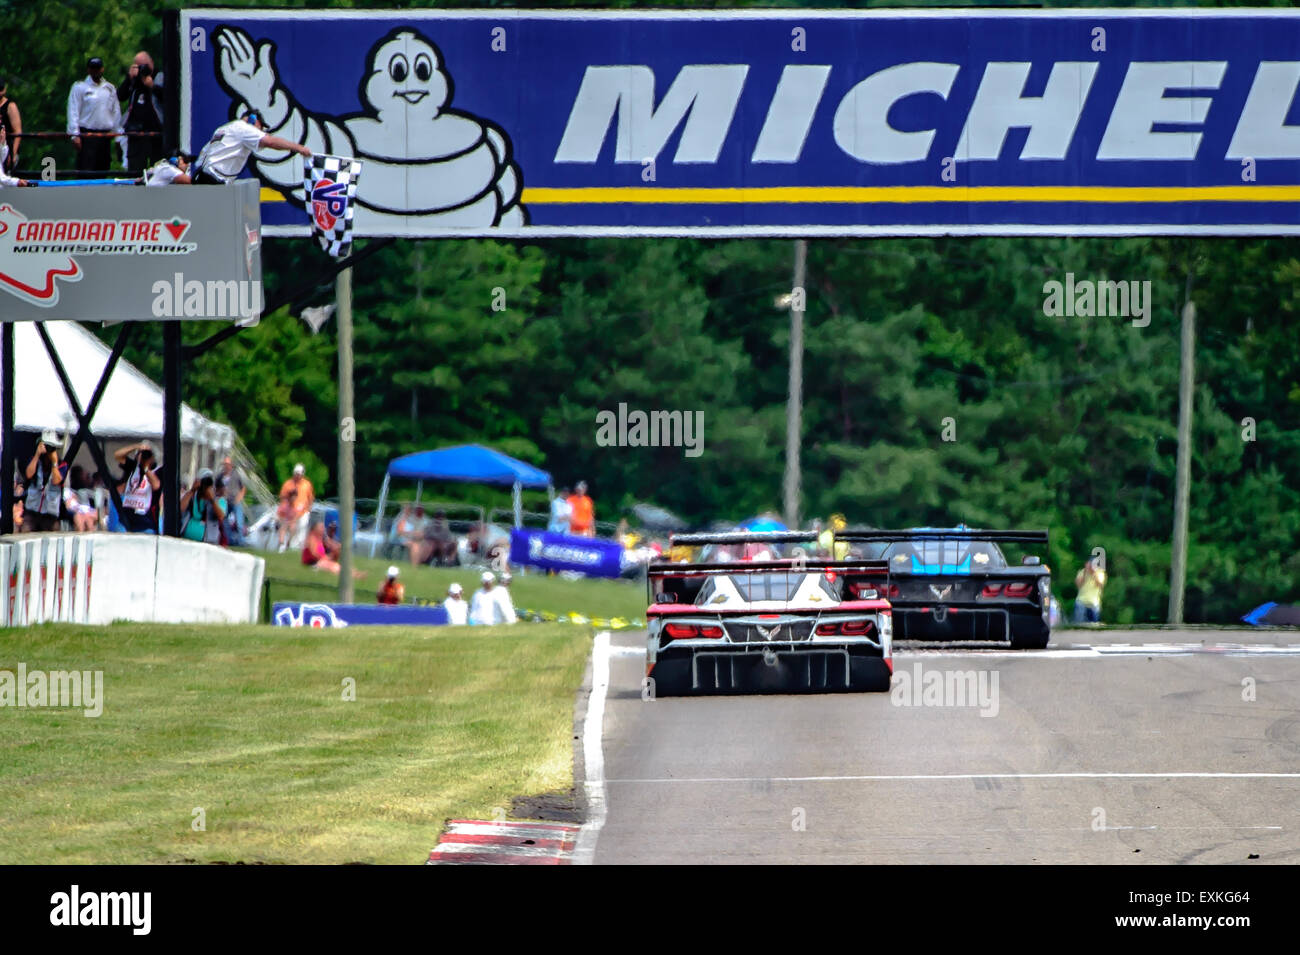 Bowmanville, CAN., 12 Jul 2015 - at the Mobil 1 SportsCar Grand Prix at Canadian Tire Motorsport Park - Mosport in Bowmanville, Canada on July 12, 2015. Stock Photo